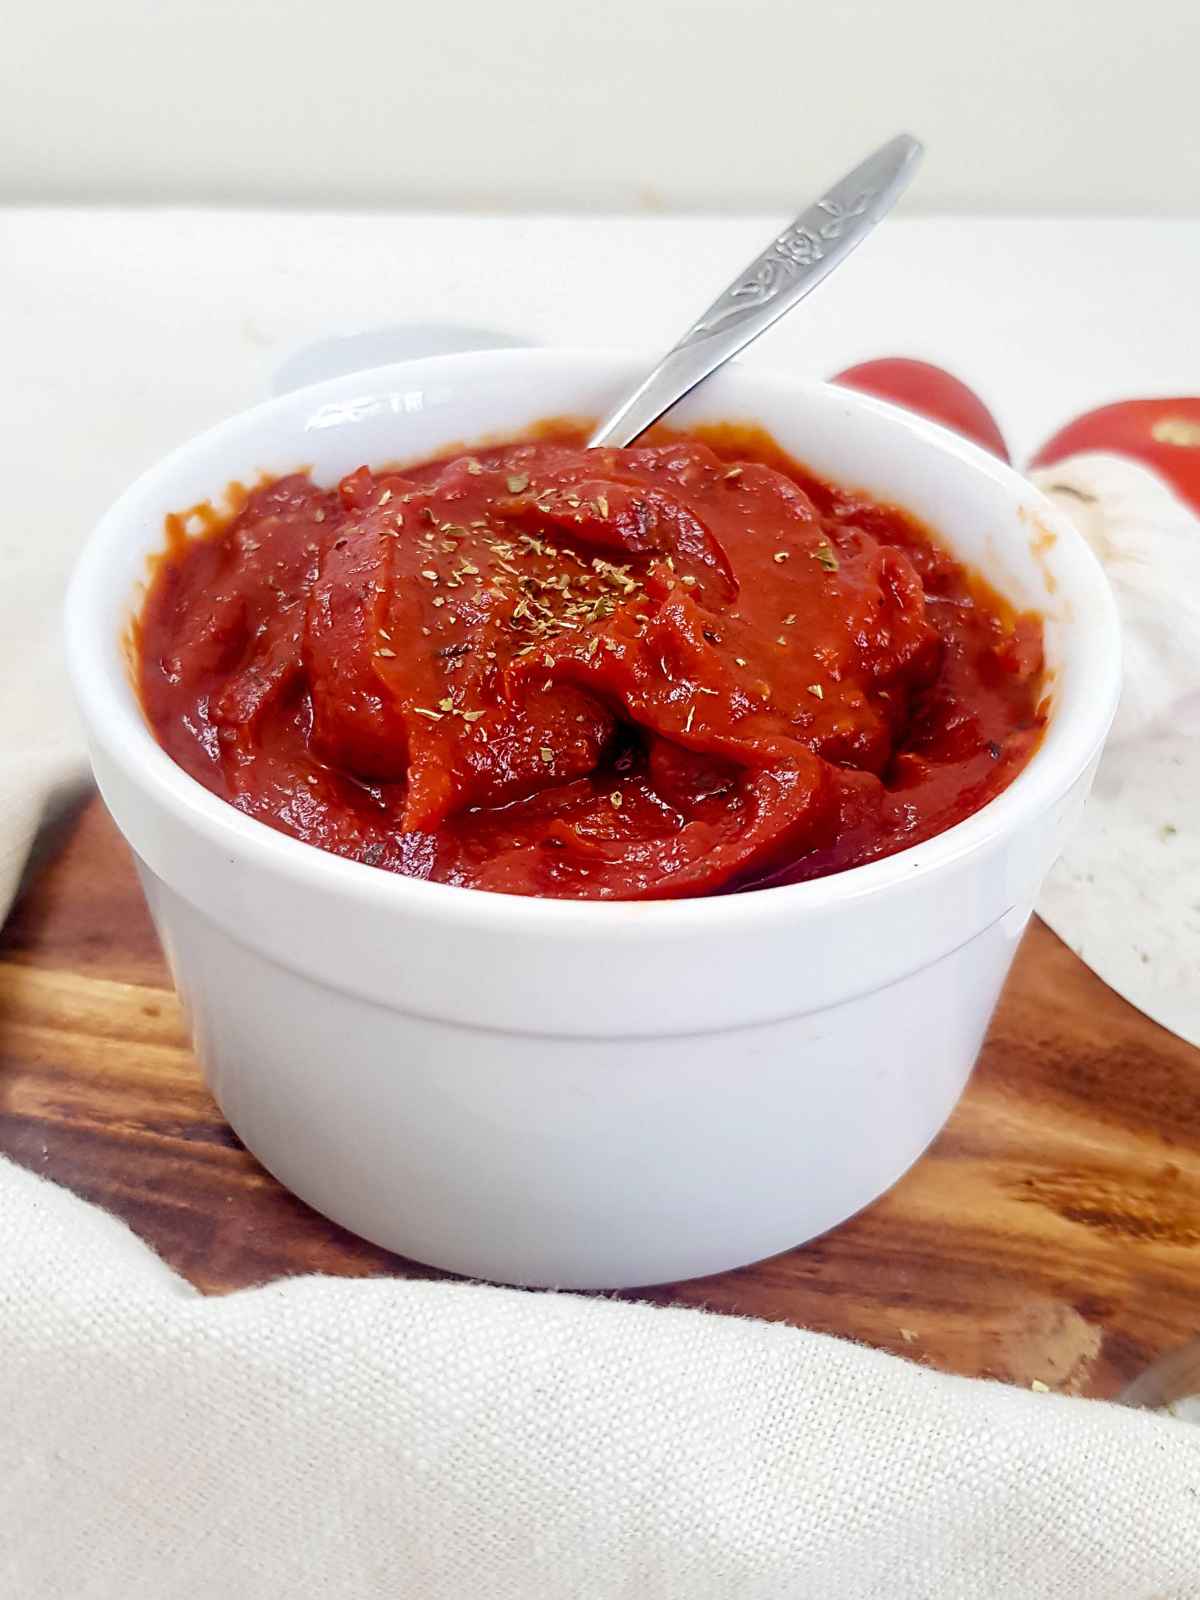 Vegan pizza sauce in a white bowl with a silver spoon on side.